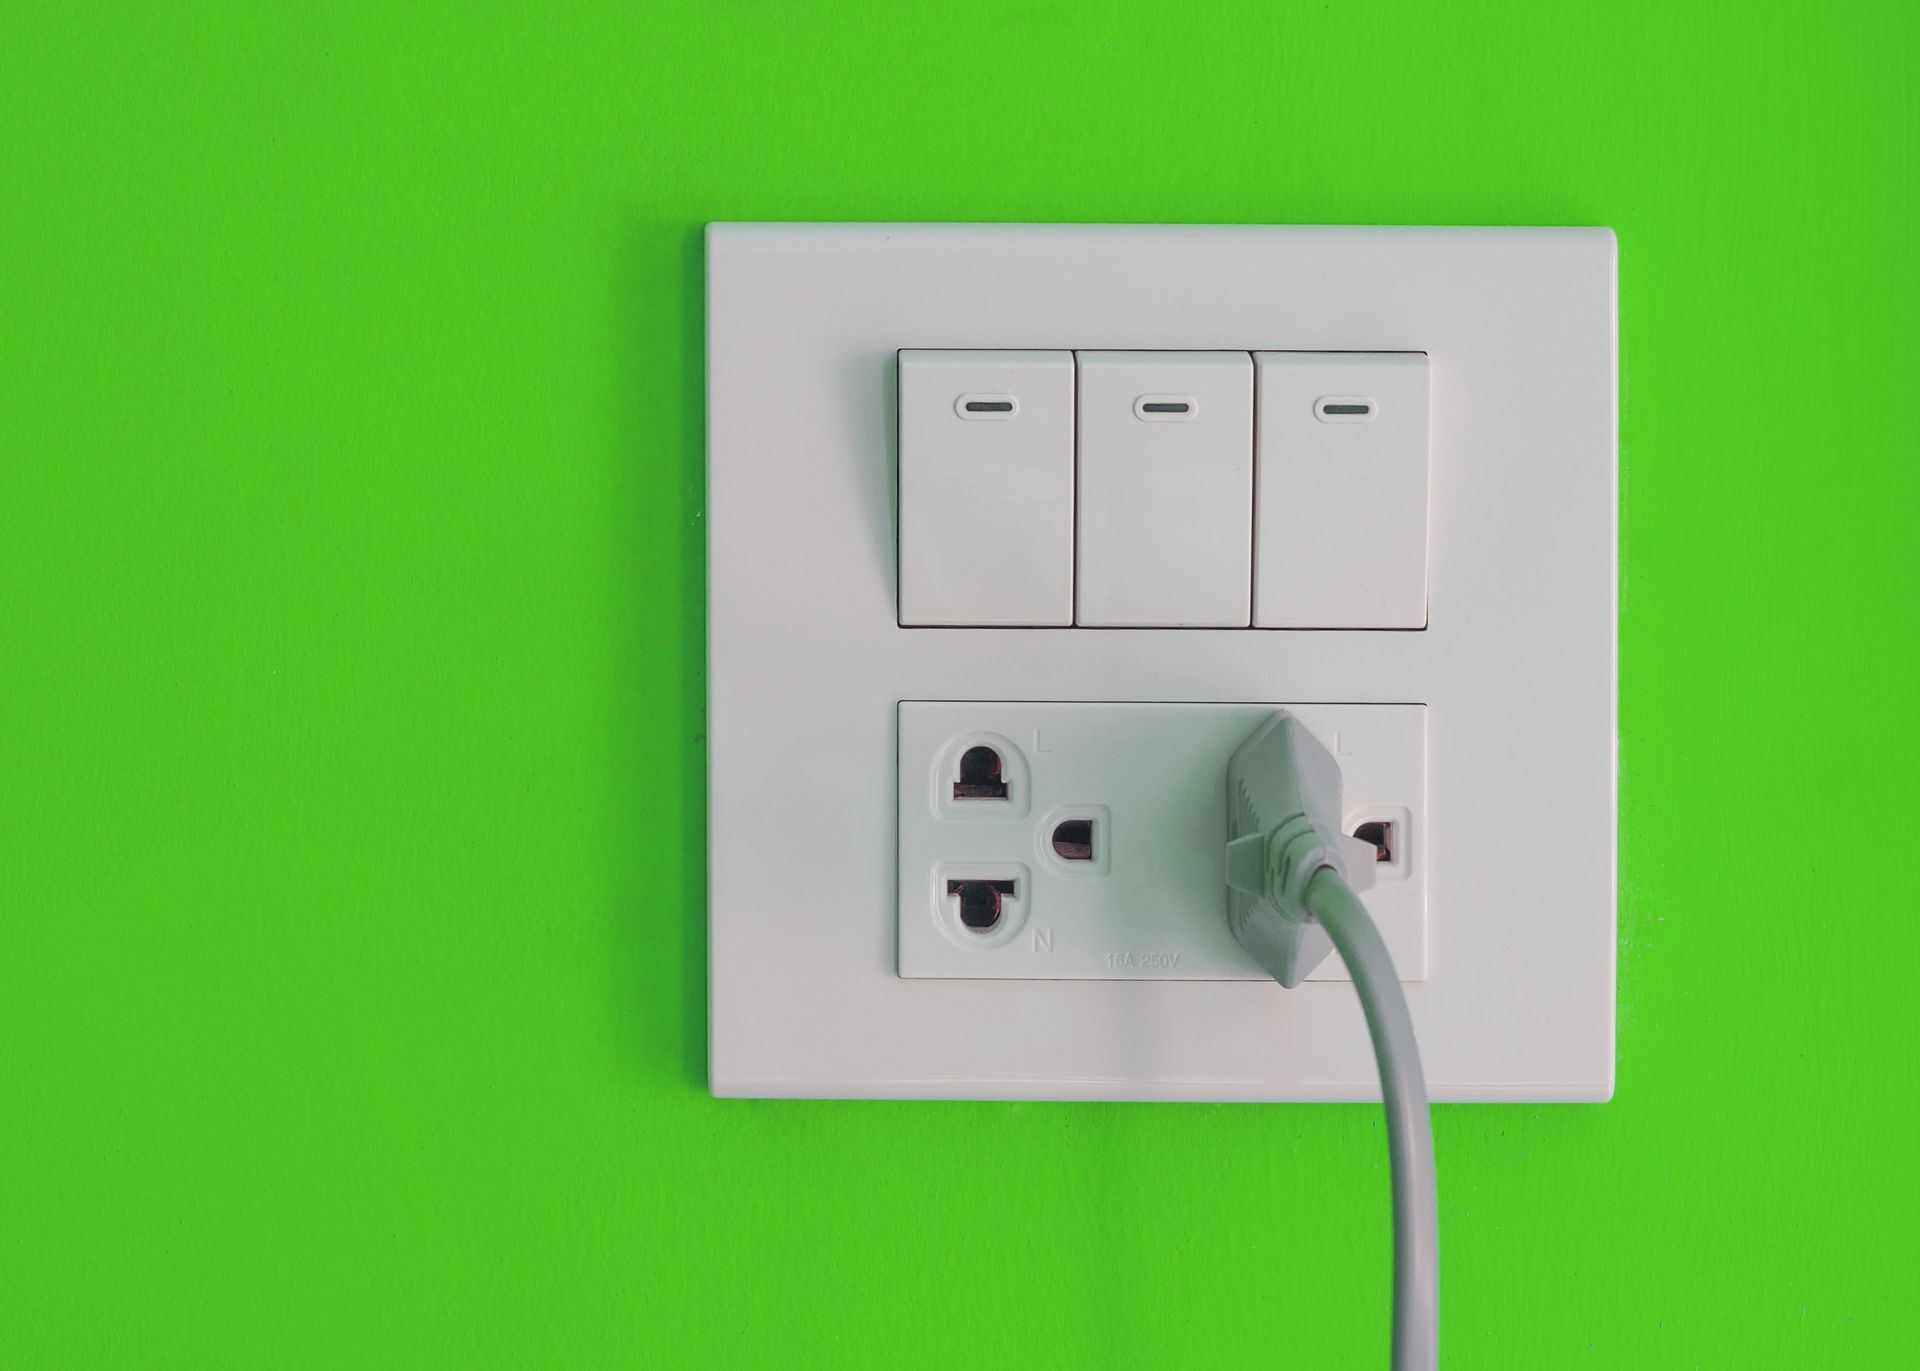 A plug is plugged into a light switch on a green wall.